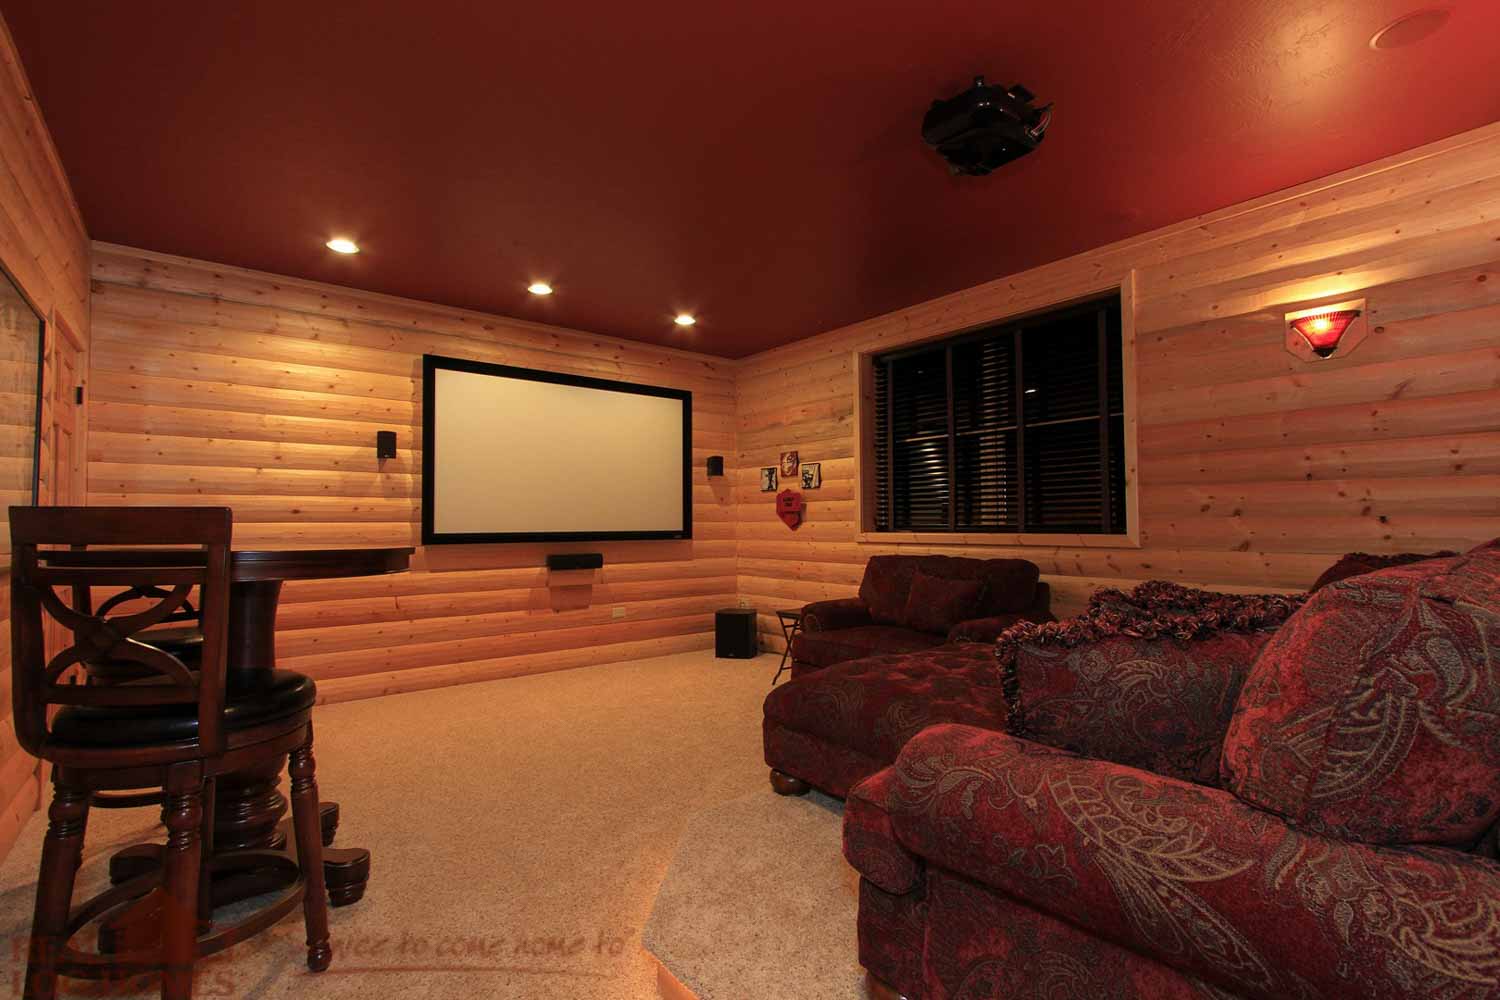 The “Finishable” Basement for Your Log Home